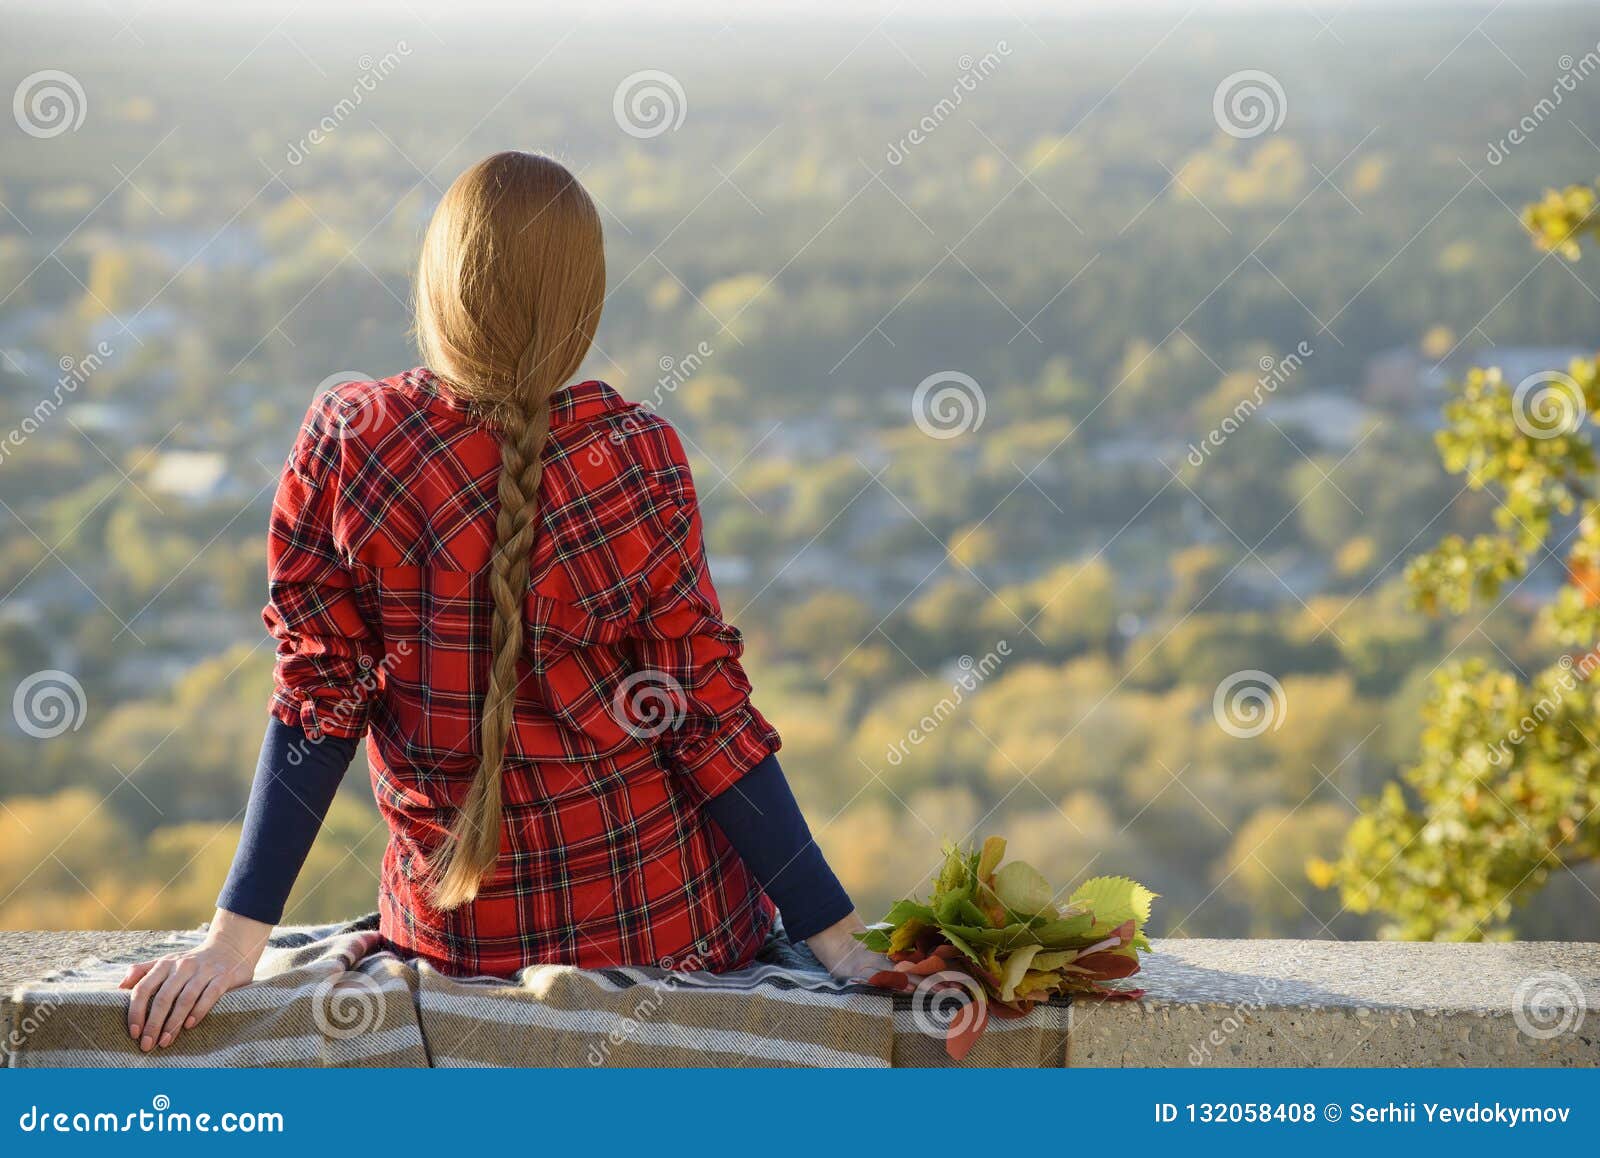 young woman with long hair sits on a hill overlooking the city